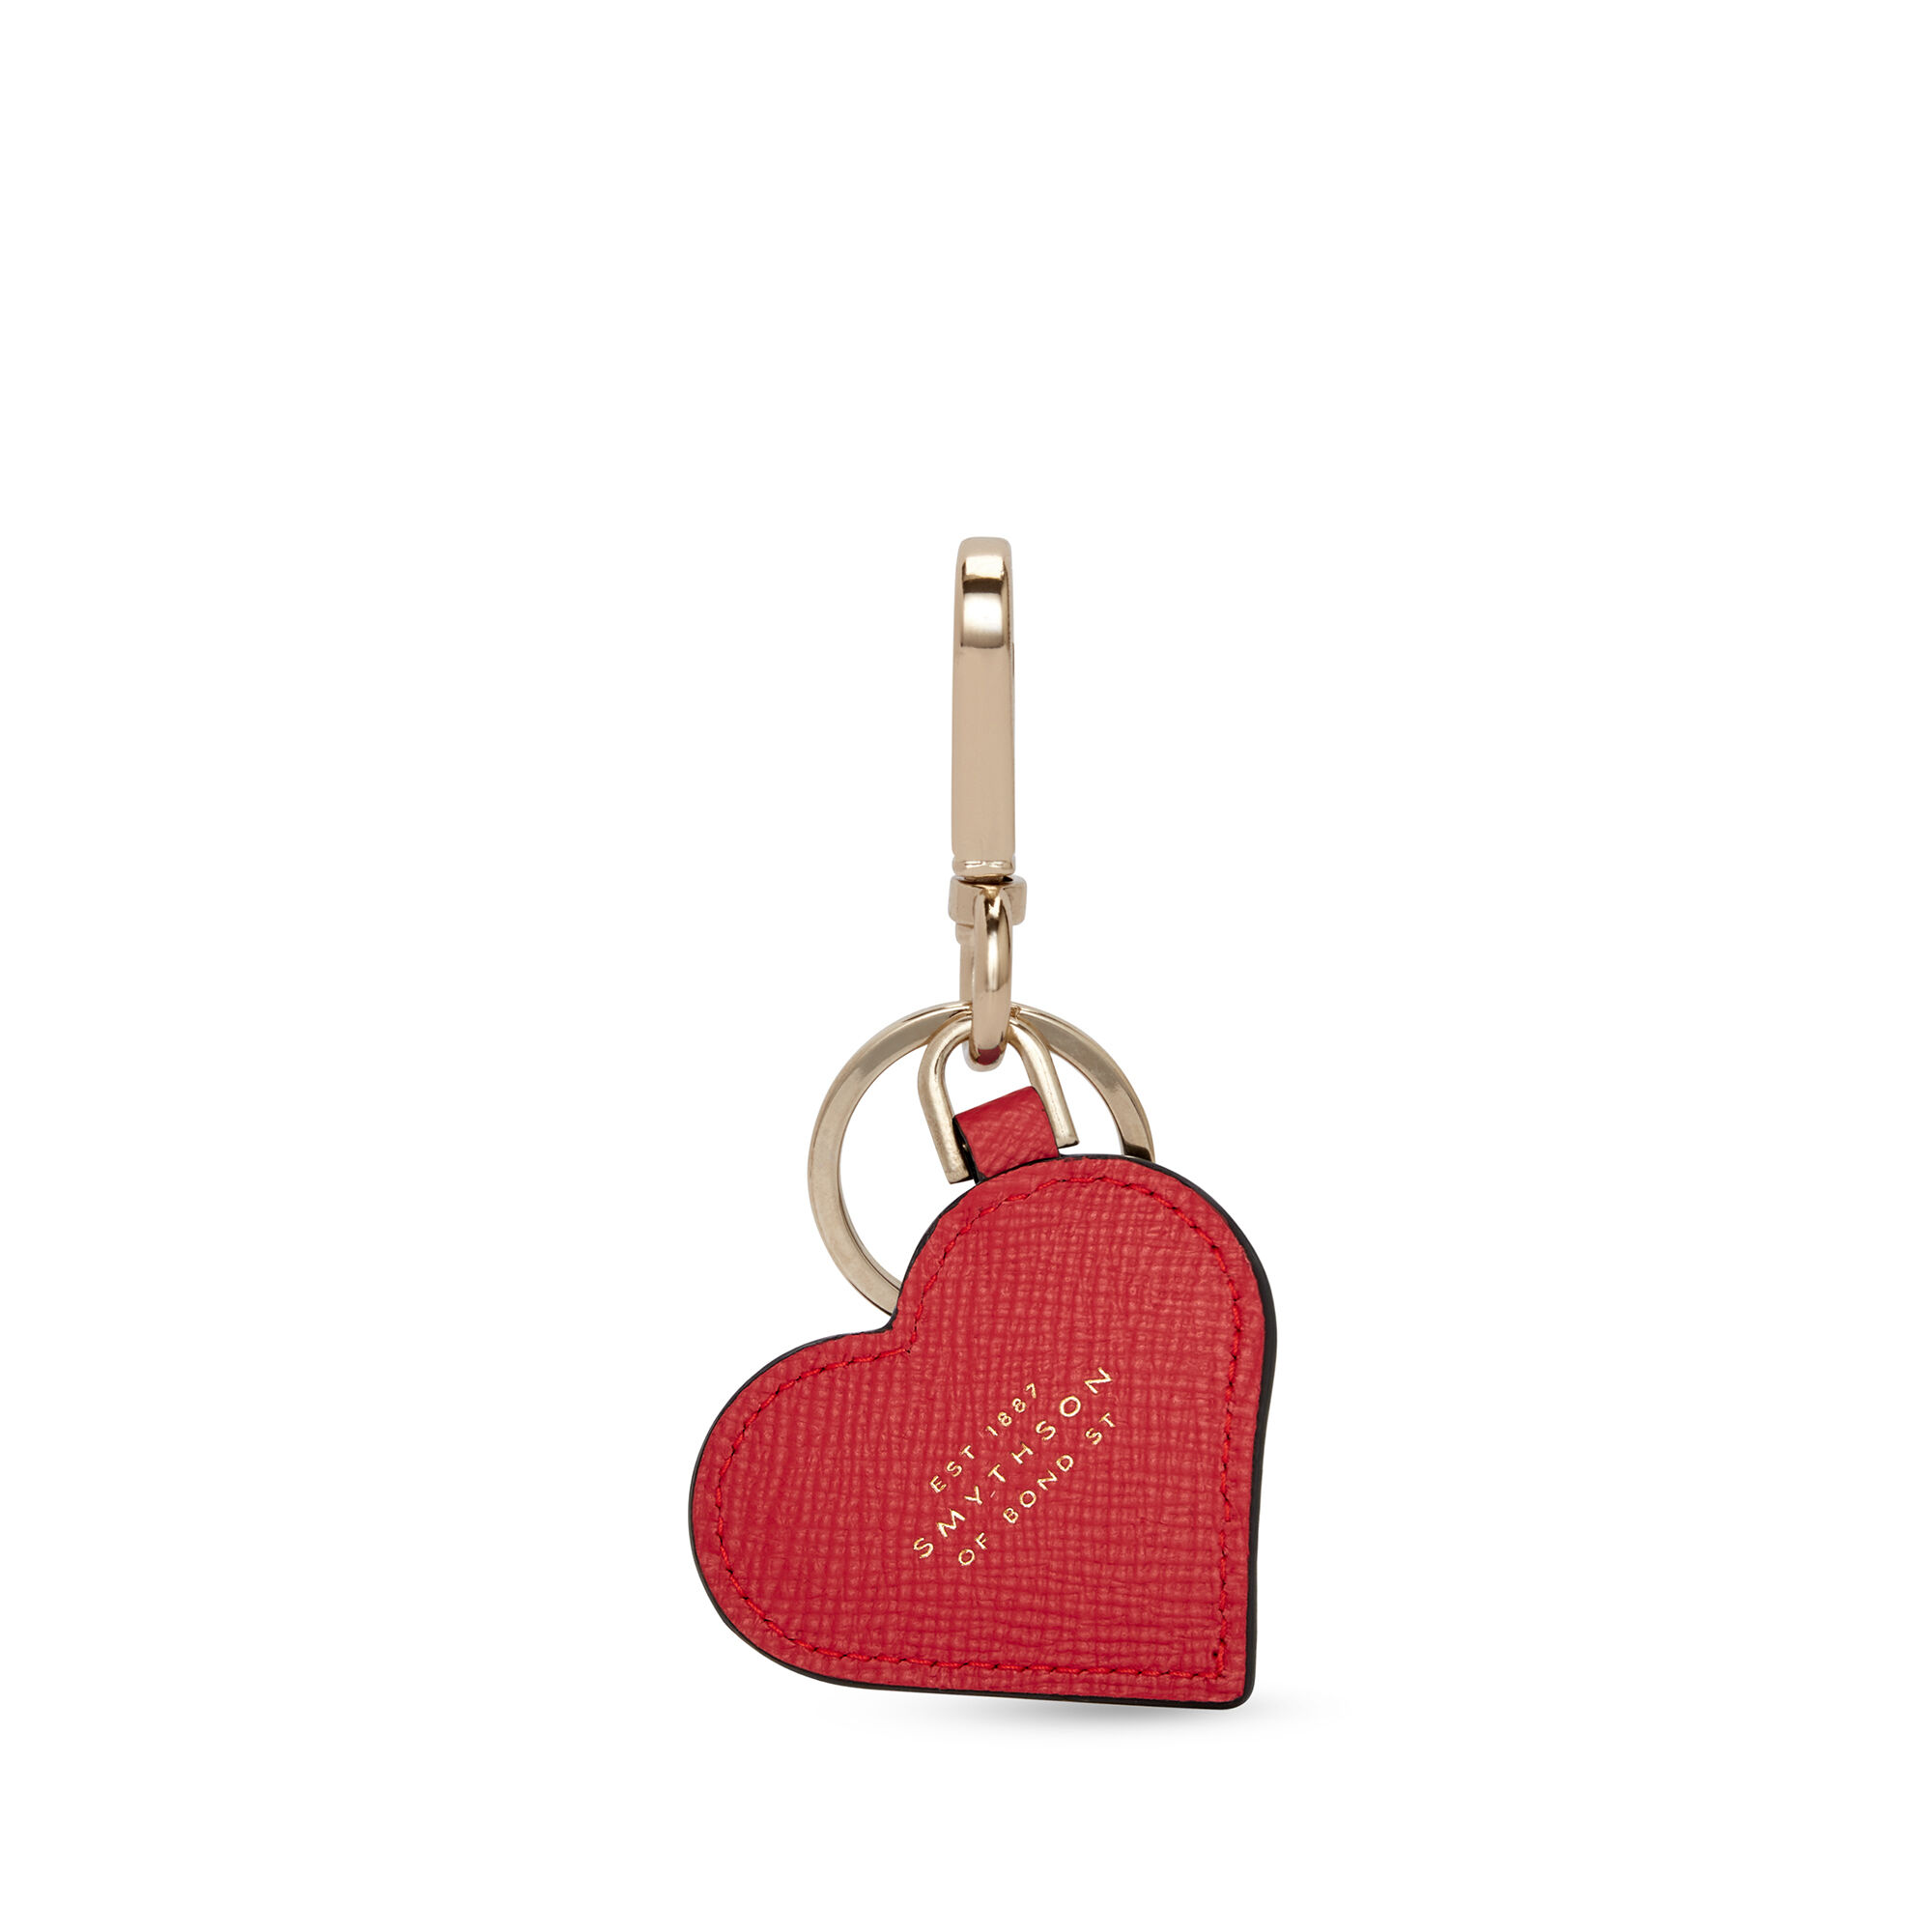 Heart keyrings in bright blue studded leather